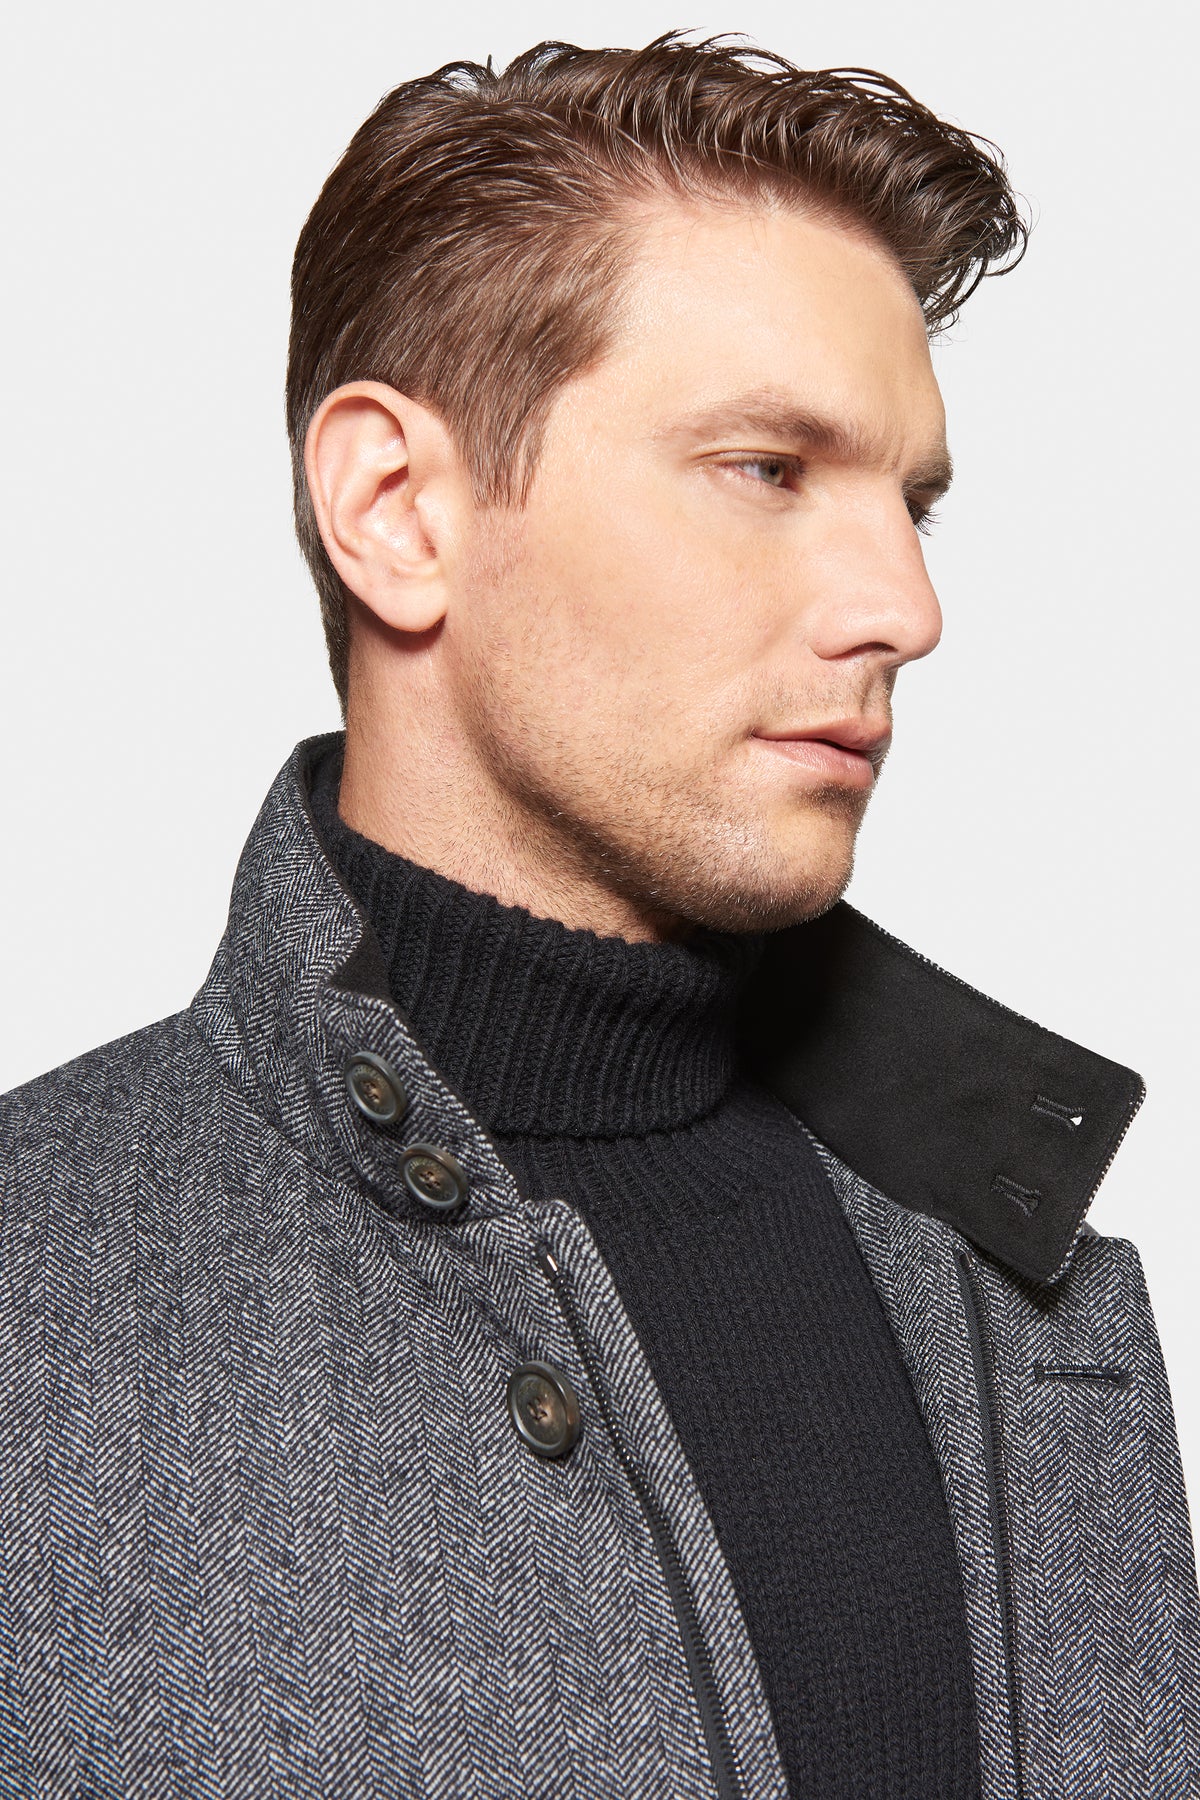 Down-Lined Waterproof Cashmere Wool Carcoat - Warmest Stylish Option for the Winter